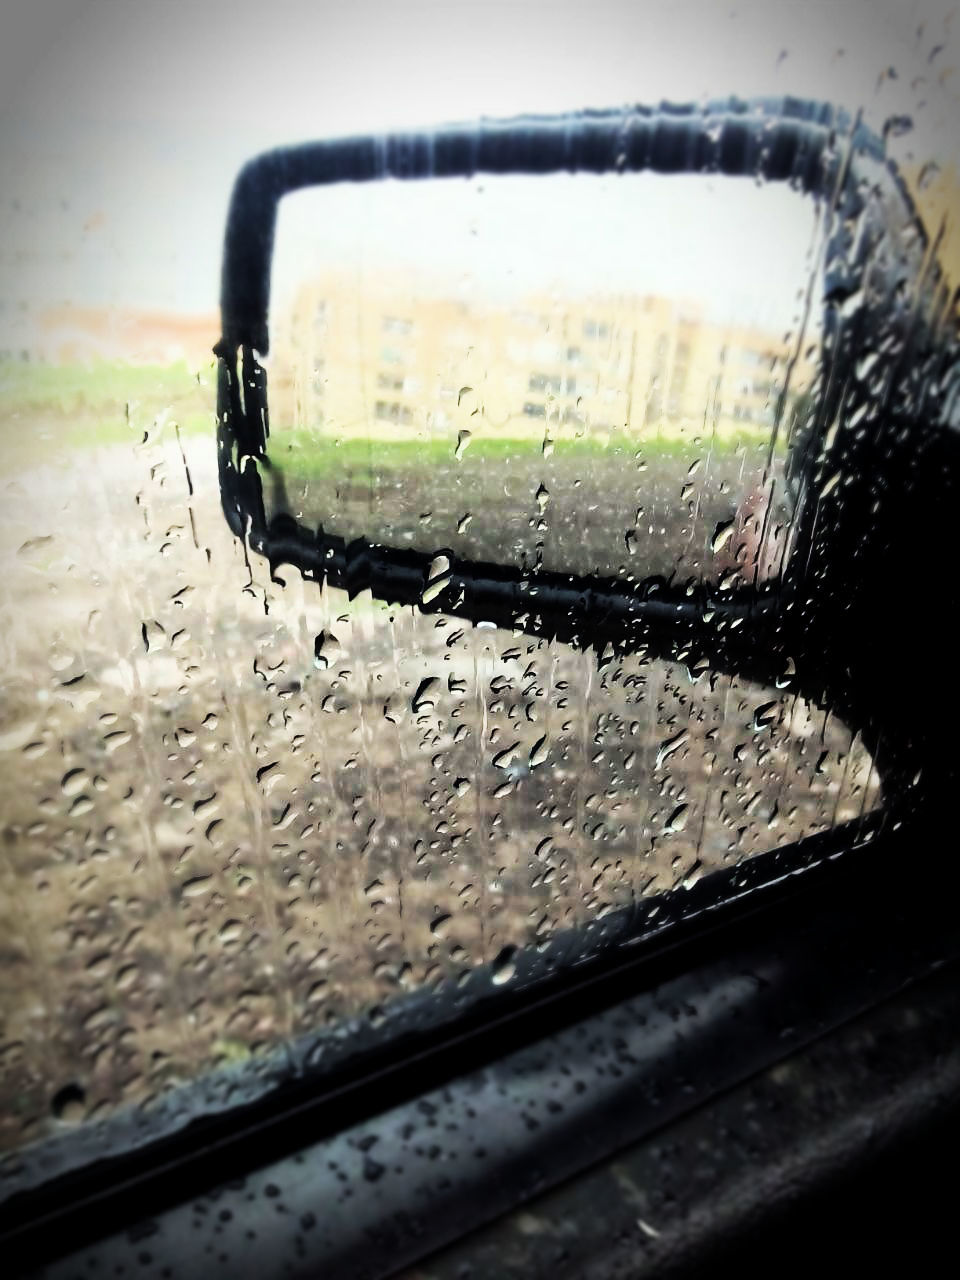 glass - material, drop, water, indoors, wet, window, transparent, close-up, rain, mode of transport, car, reflection, transportation, glass, metal, vehicle interior, focus on foreground, land vehicle, no people, raindrop